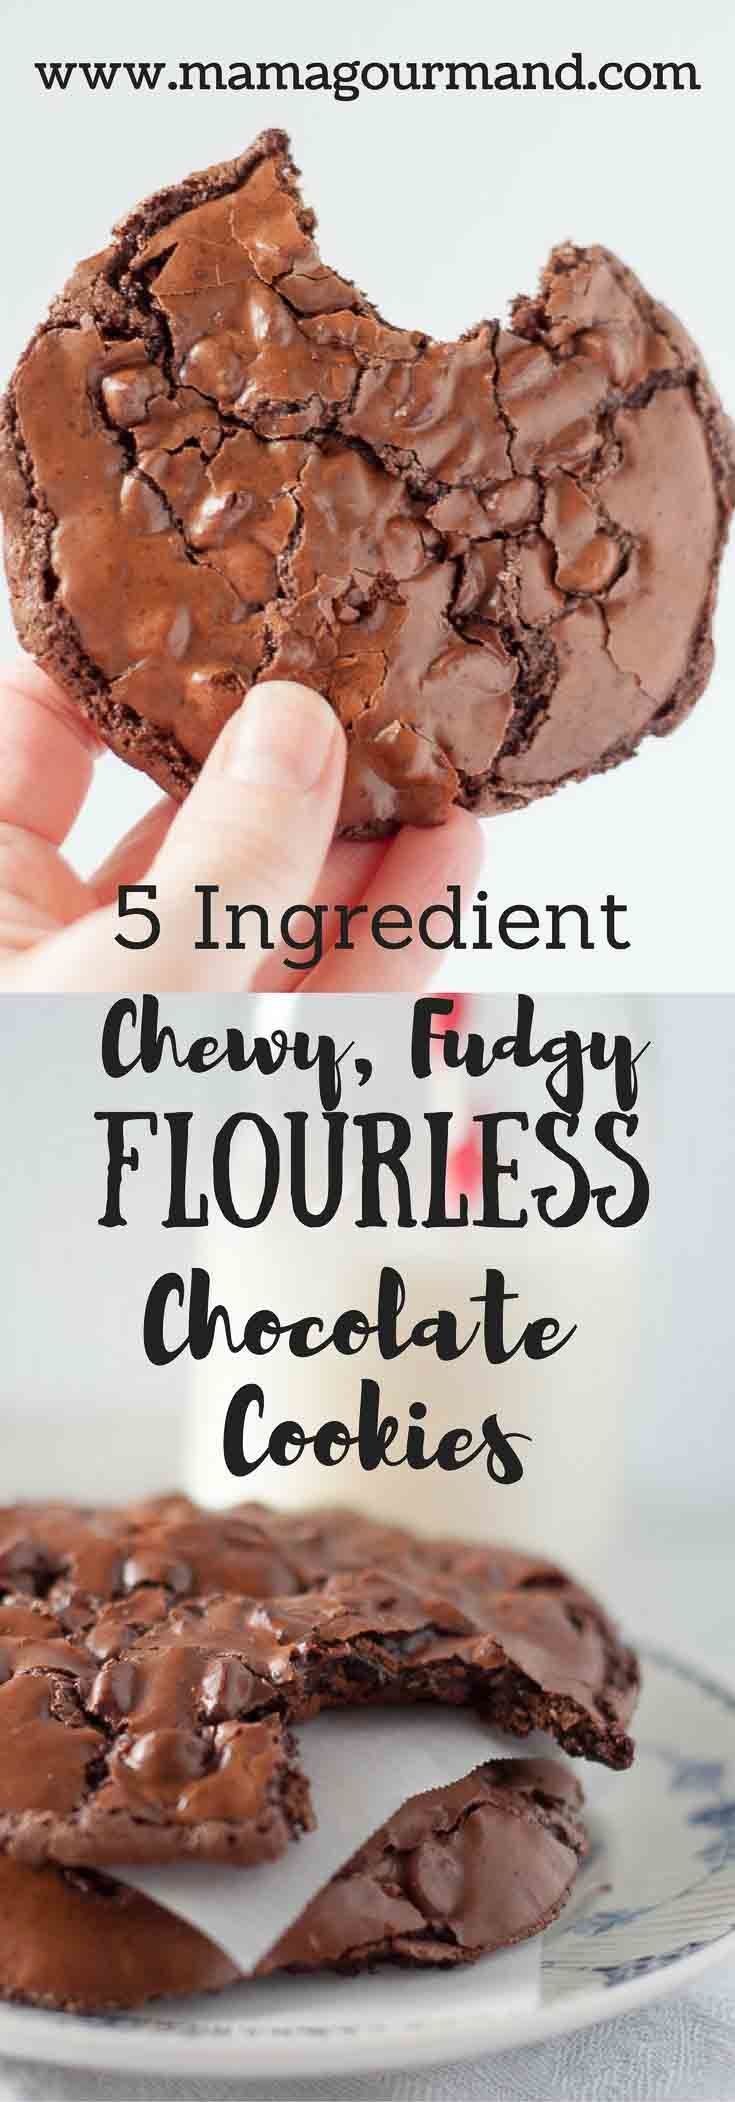 Chewy, Fudgy Flourless Chocolate Cookies are a naturally gluten free chocolate cookie with only 5 ingredients.